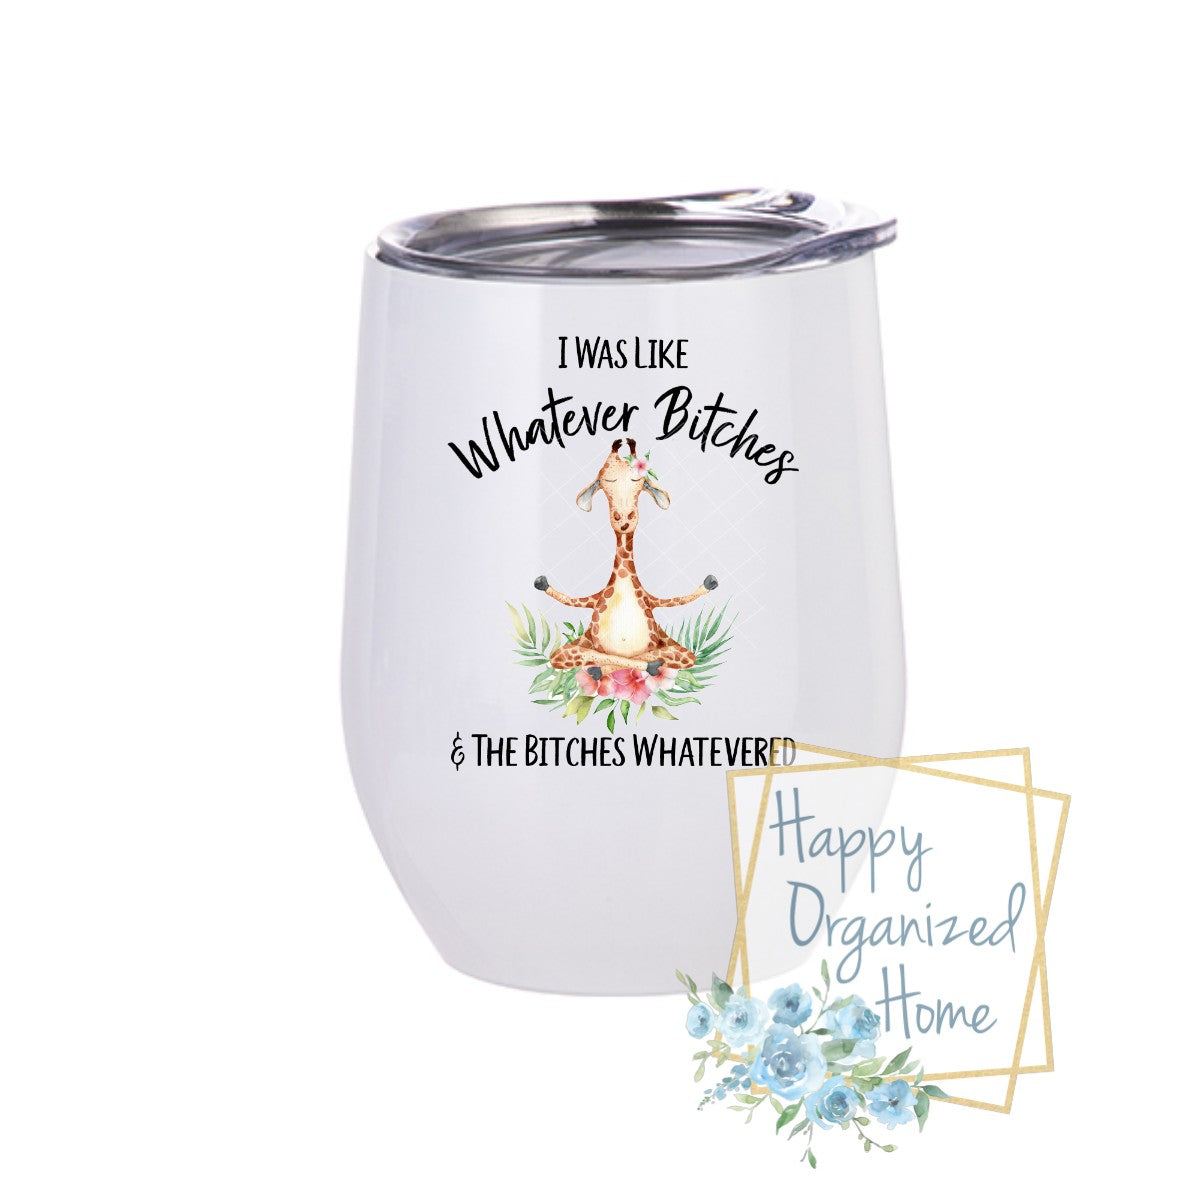 I was like Whatever Bitches and the Bitches Whatevered Giraffe - Insulated Wine Tumbler